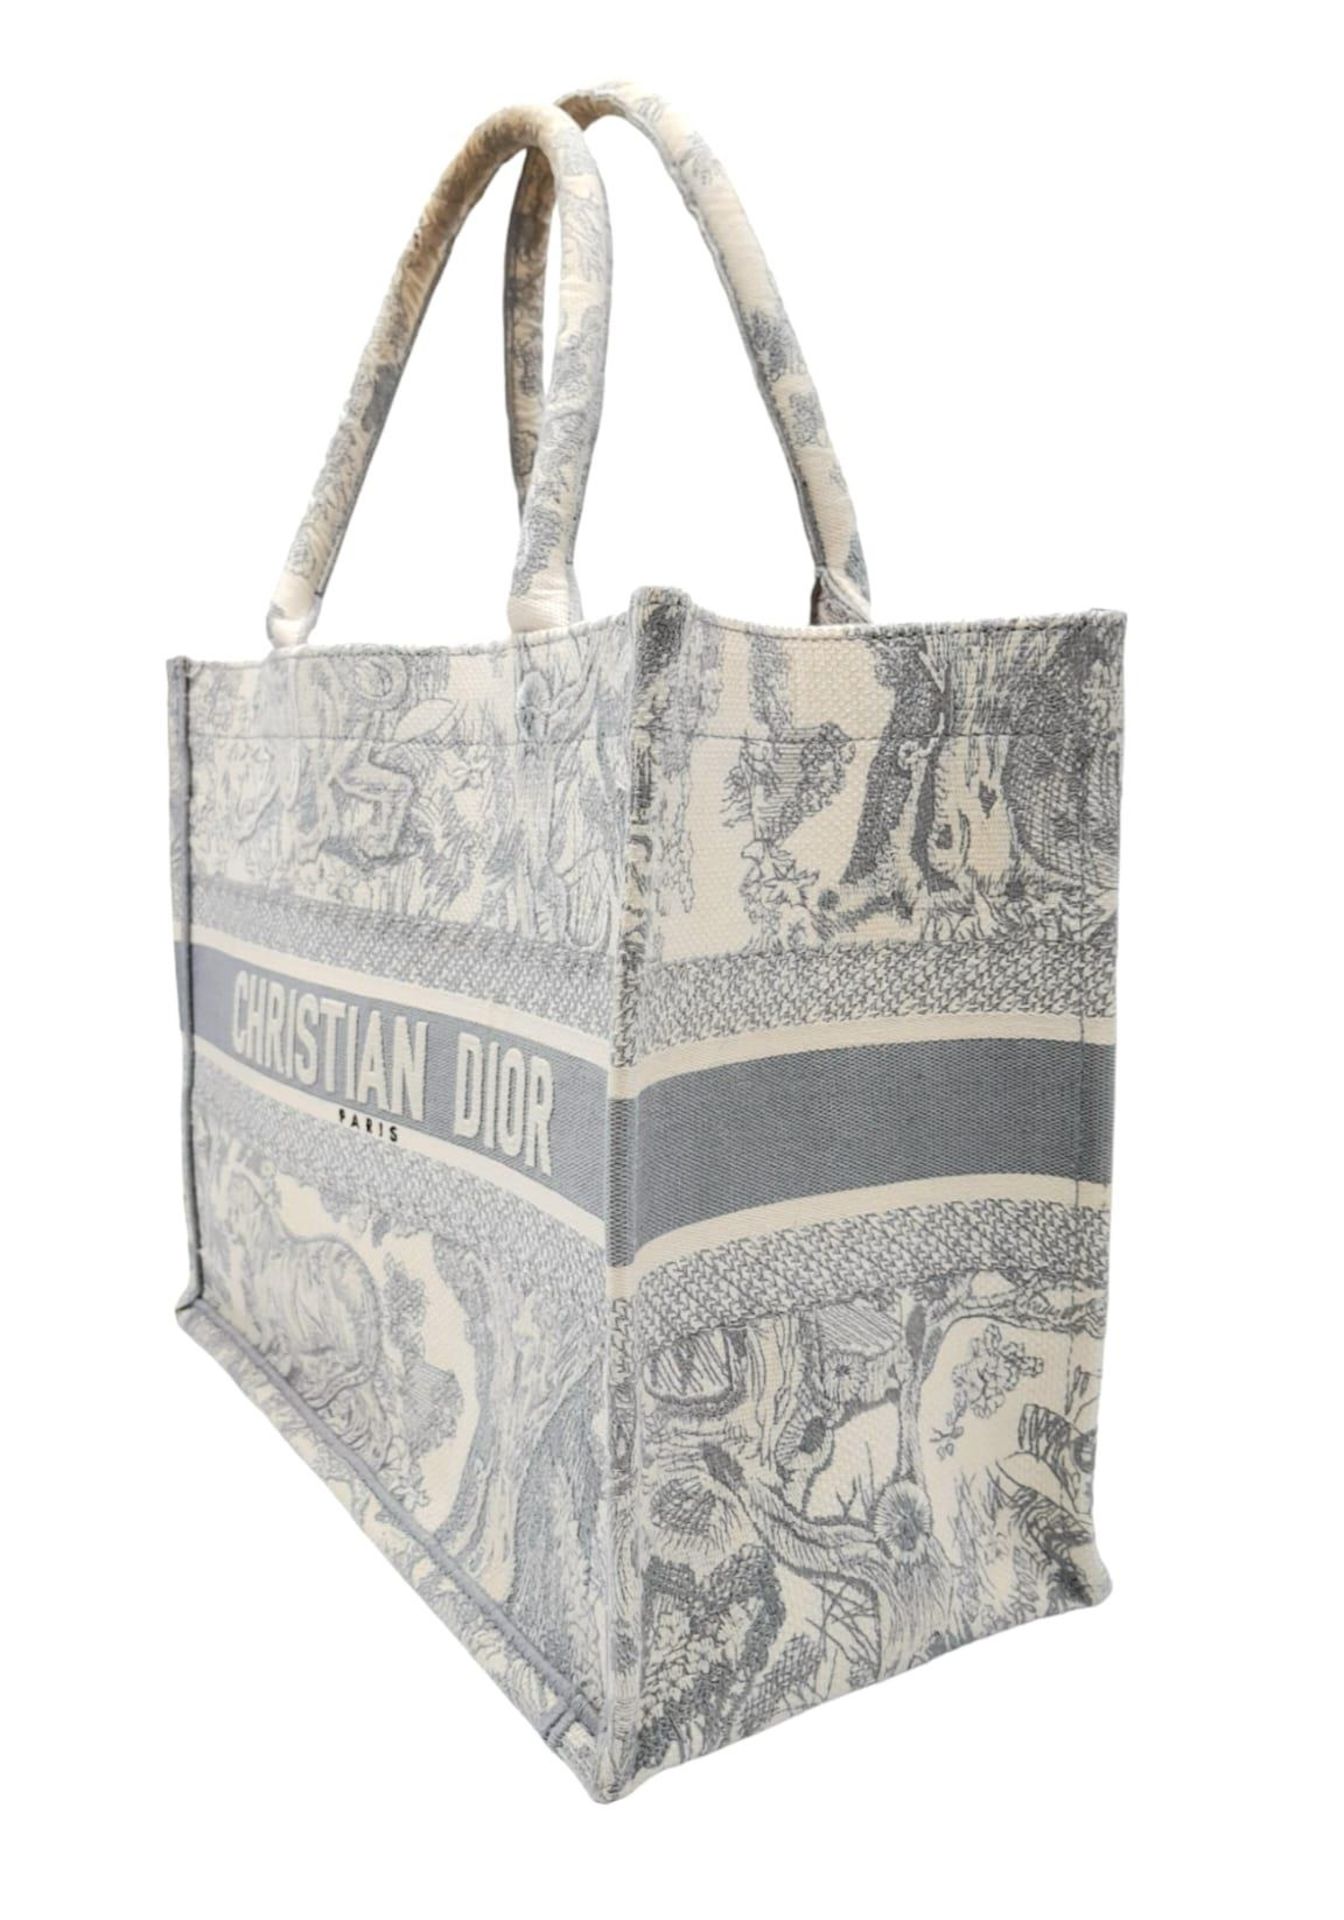 A Christian Dior small toile de jouy book tote bag, grey/white embroidery, top handles. Size approx. - Bild 2 aus 7